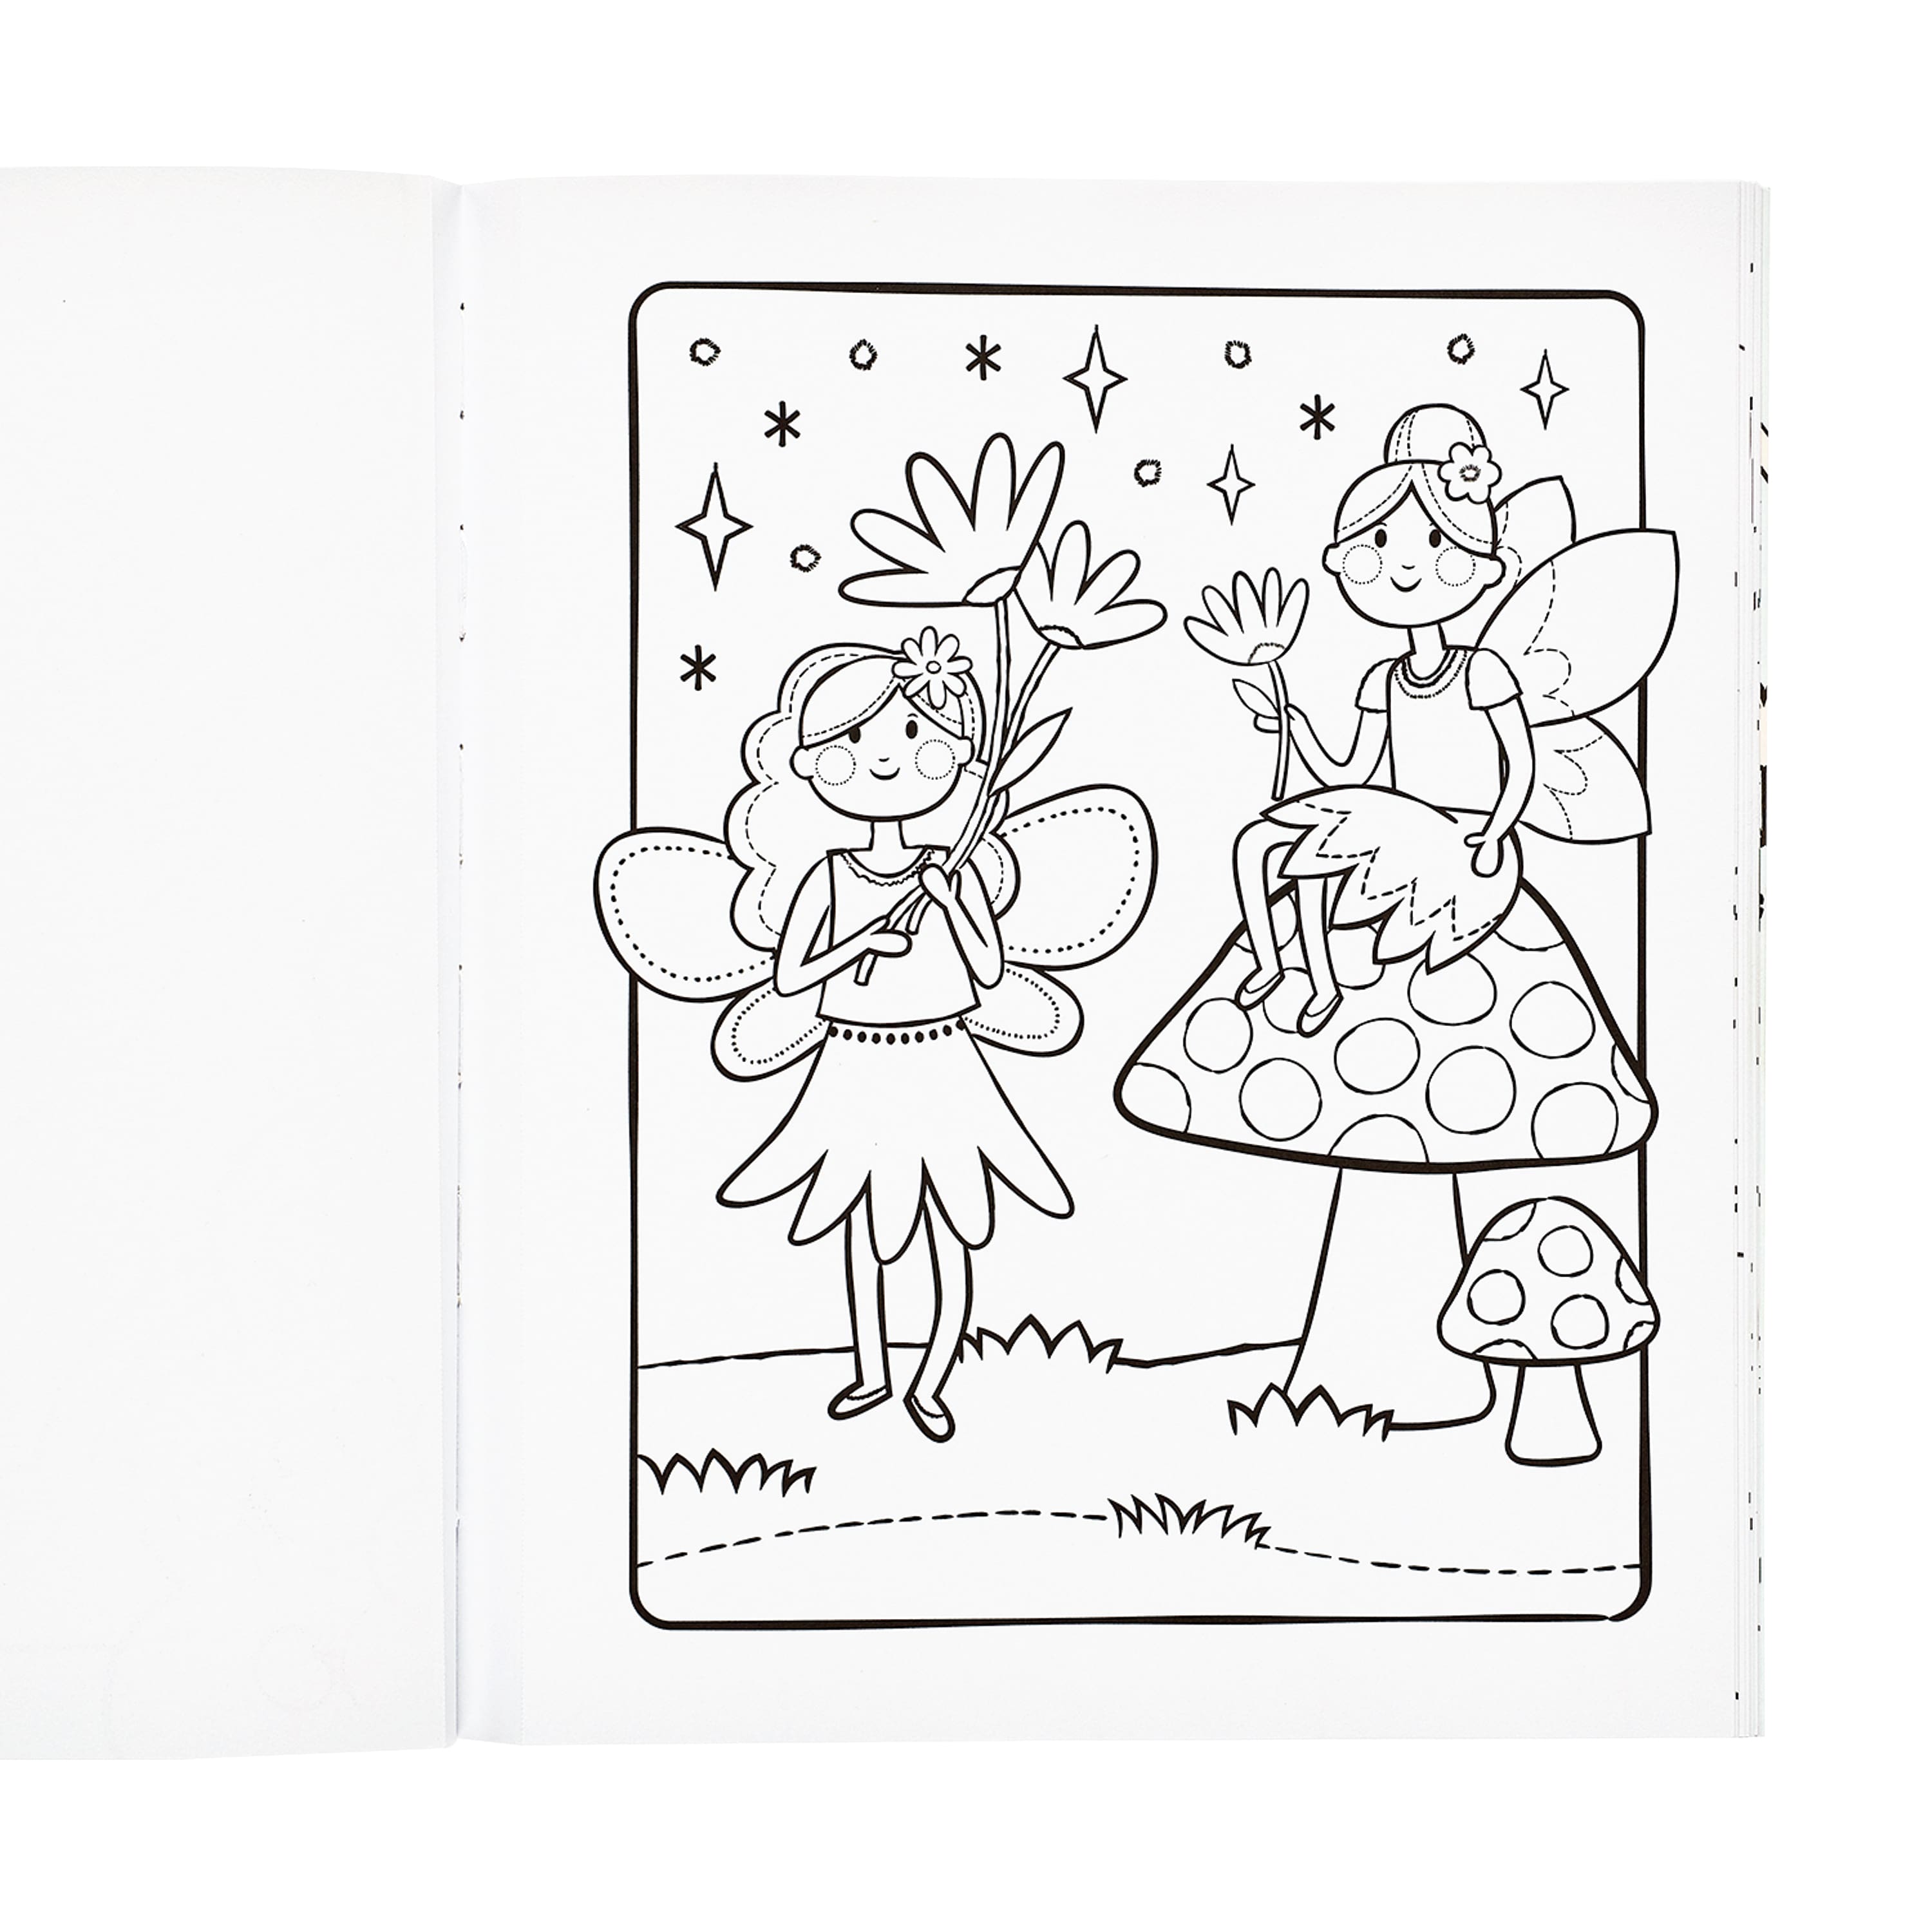 OOLY Color-in&#x27; Book: Princesses &#x26; Fairies